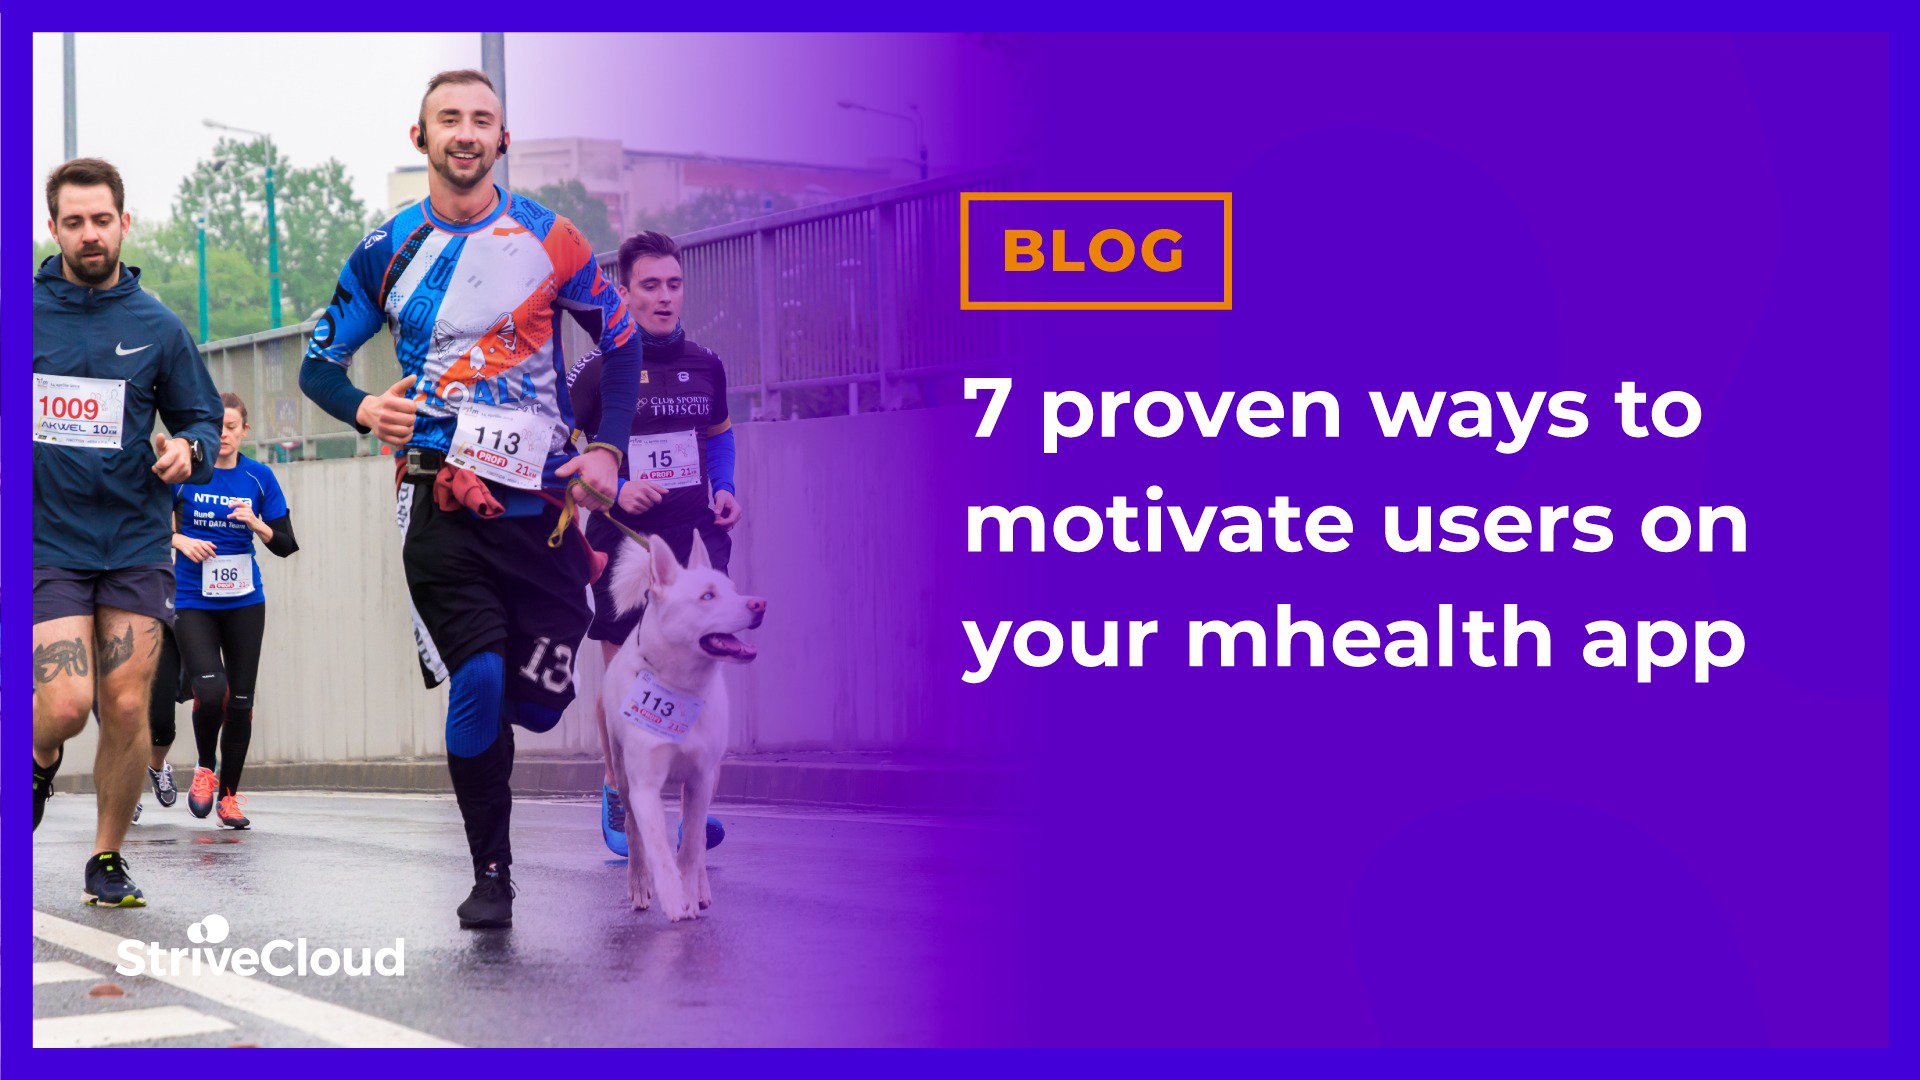 7 proven ways to motivate users on your mhealth app